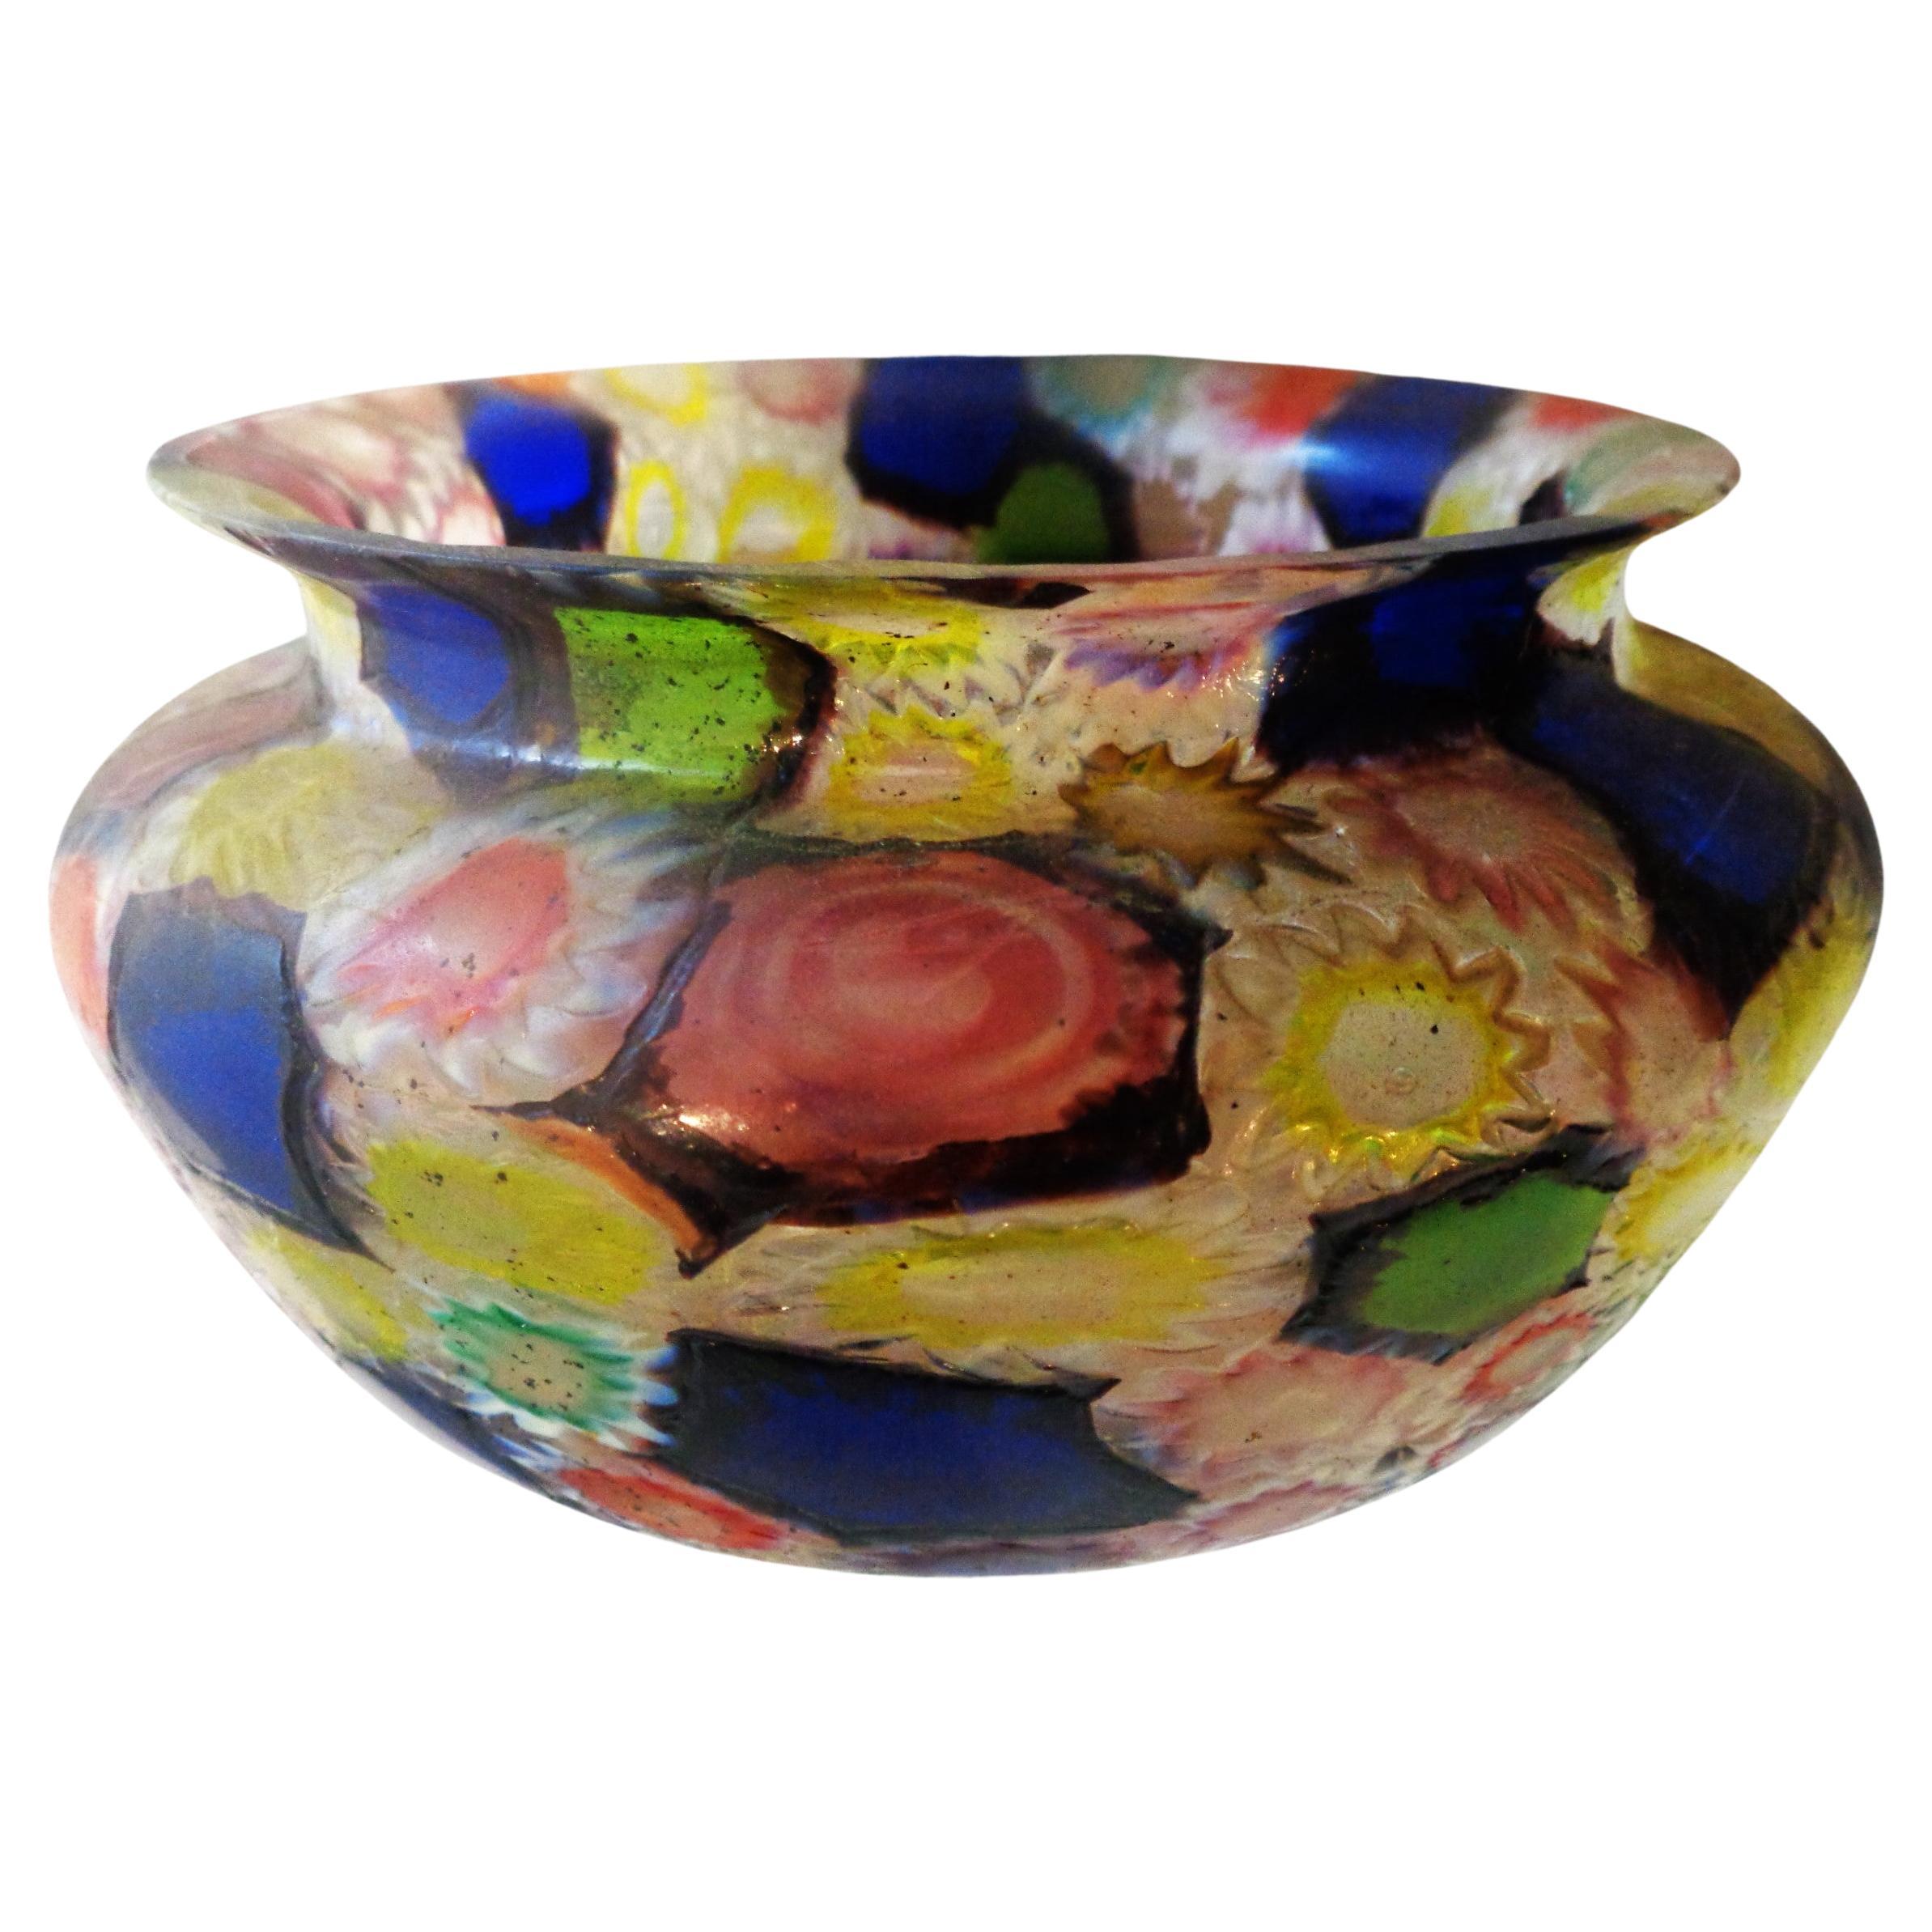  Fratelli Toso Murano multi-color Millefiori flower and star mosaic blown glass vase. Italy, circa 1950-1960. Measures a tiny bit under 3 1/2